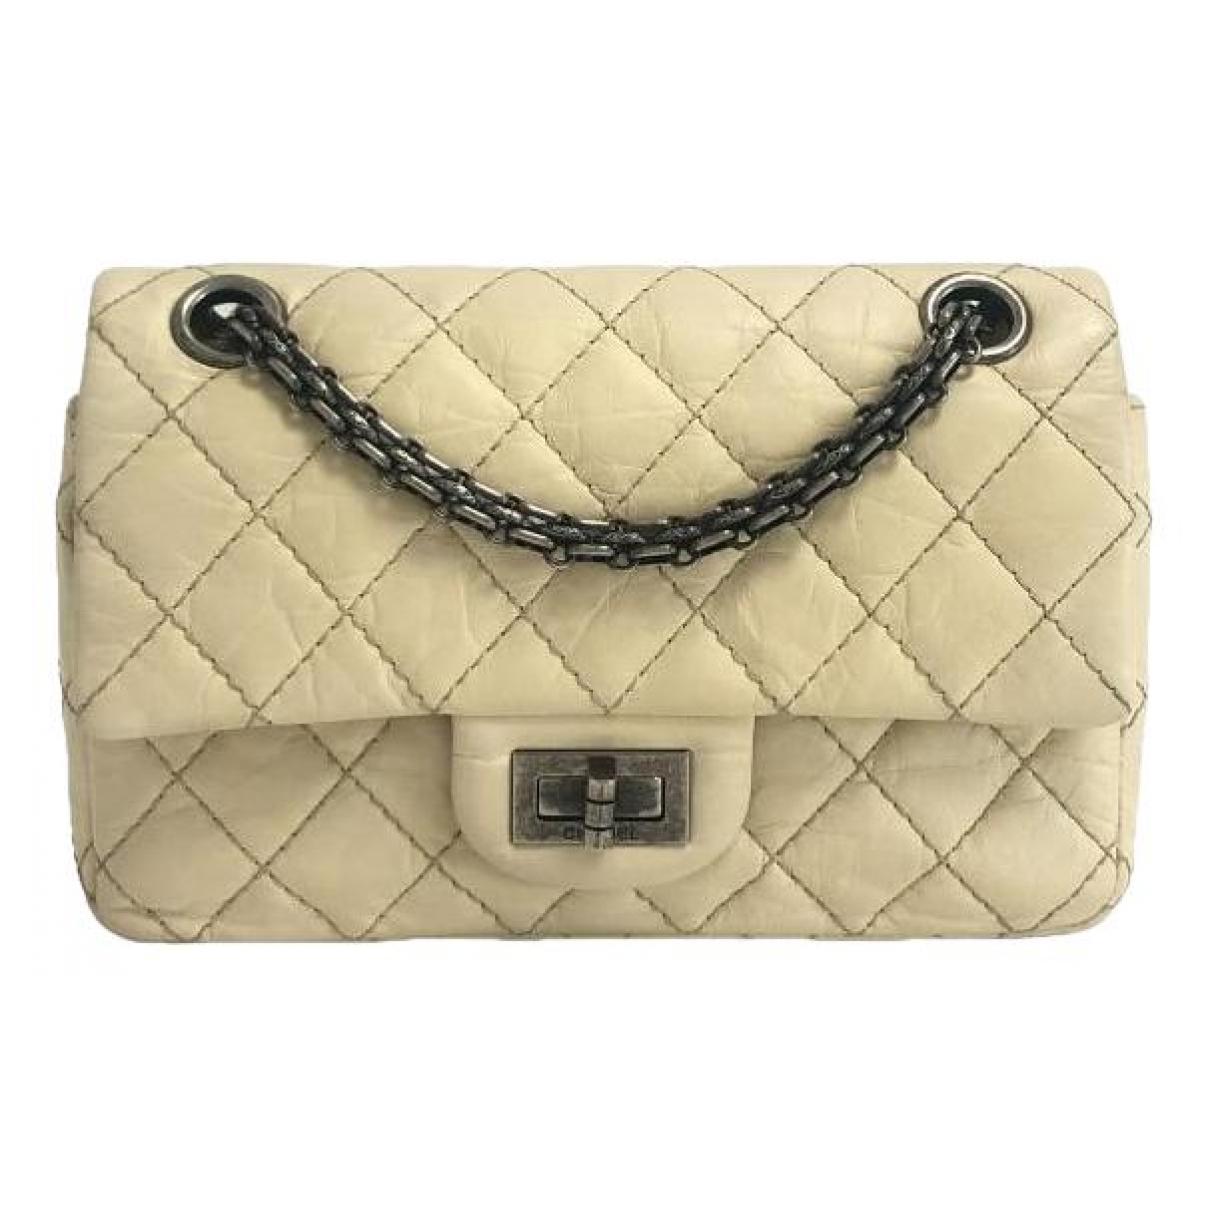 2.55 leather crossbody bag Chanel Beige in Leather - 35497895